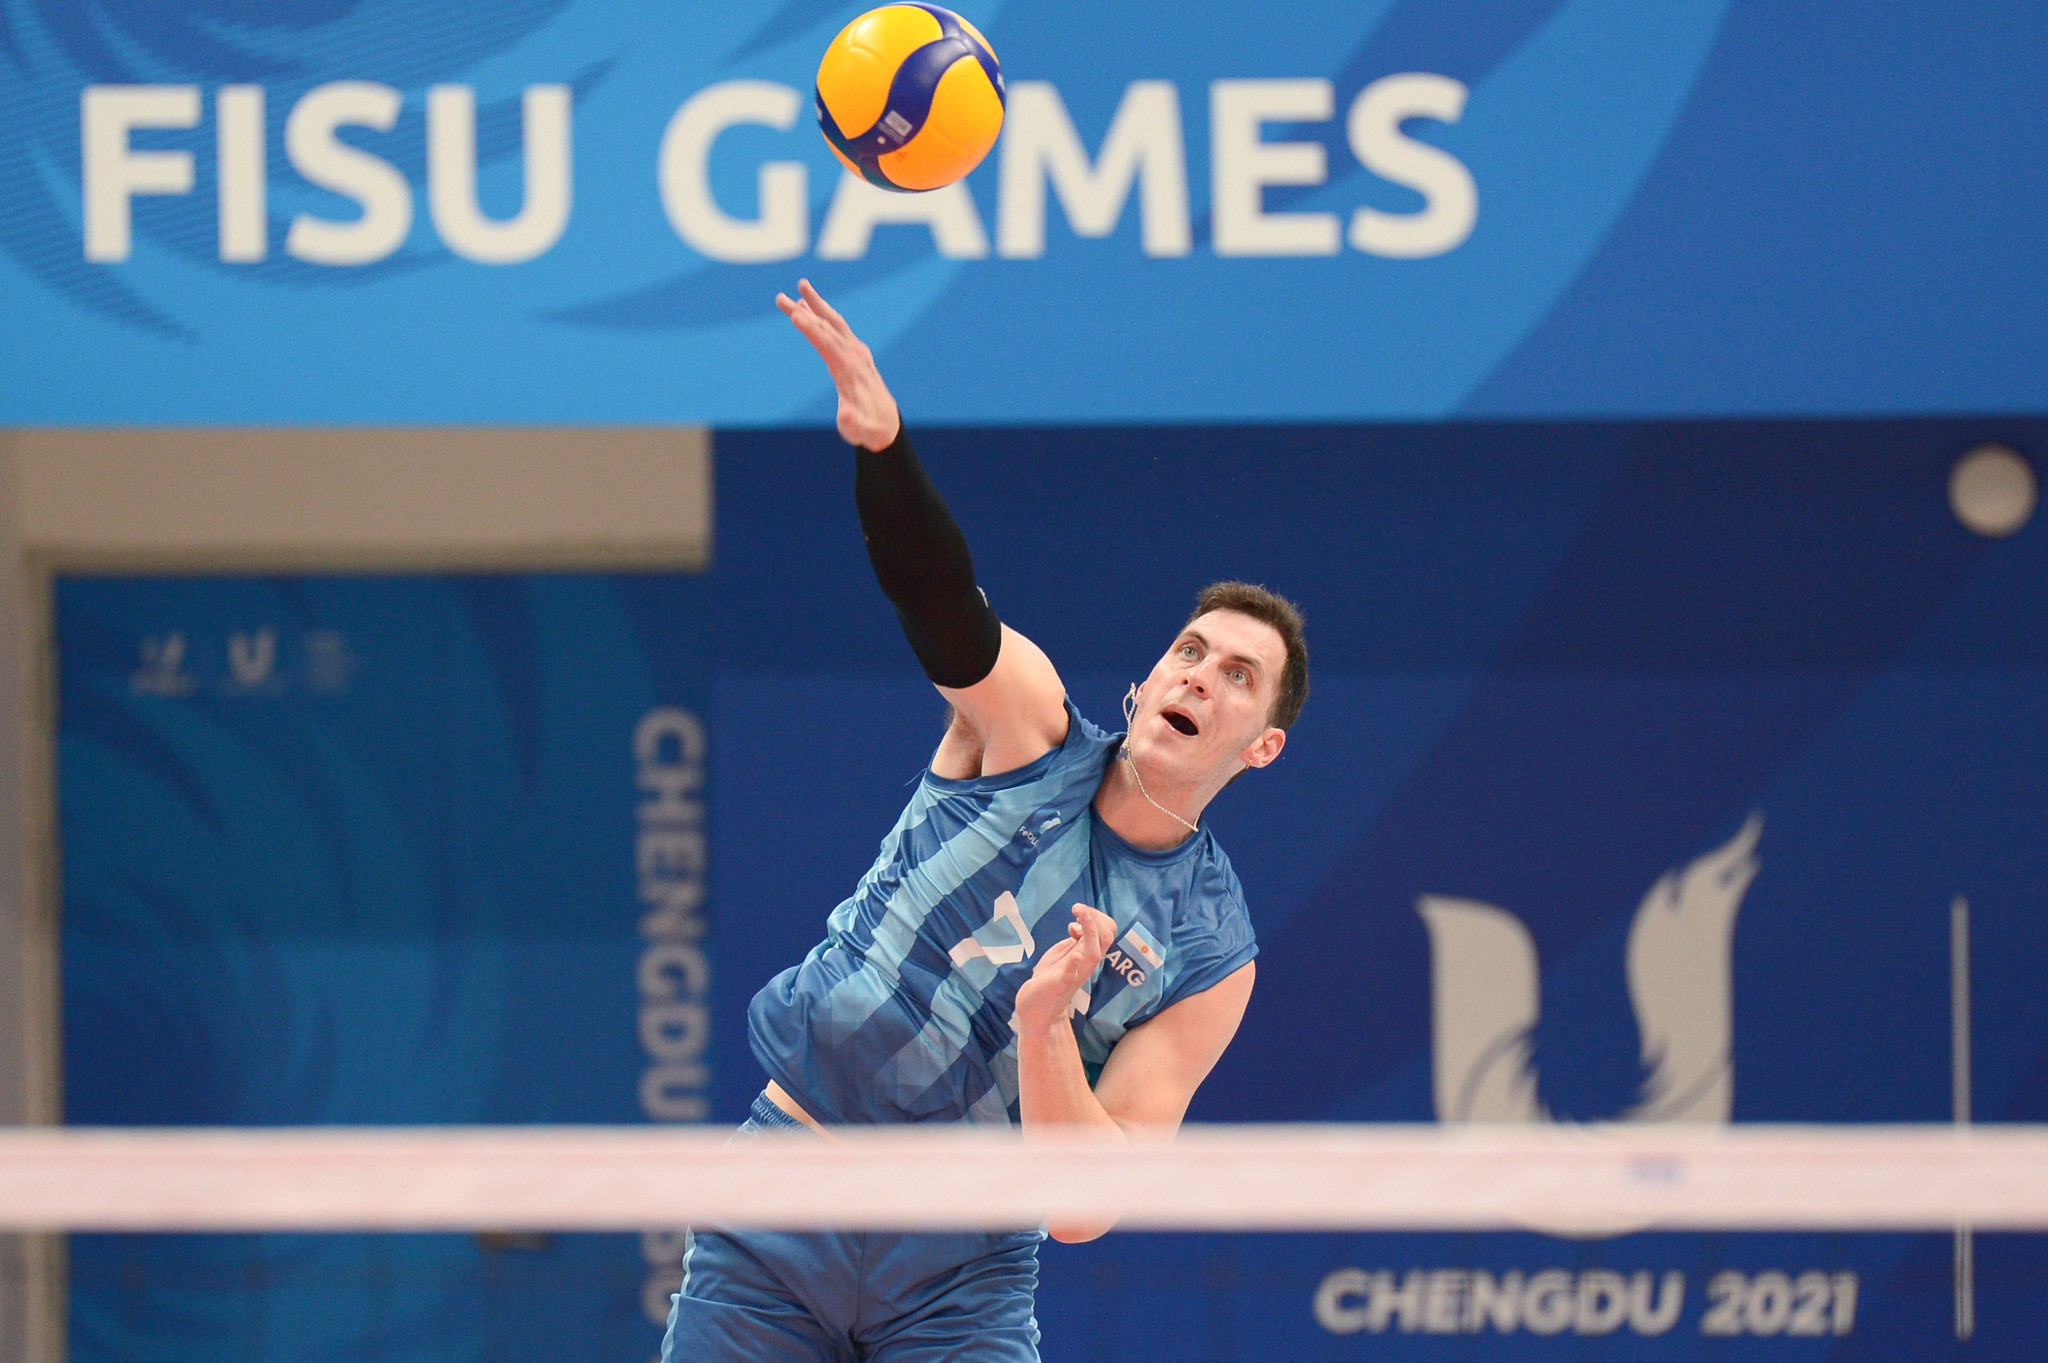 Matias Giraudo Escurra in action for Argentina’s volleyball team in the preliminary round against Czech Republic ©FISU 